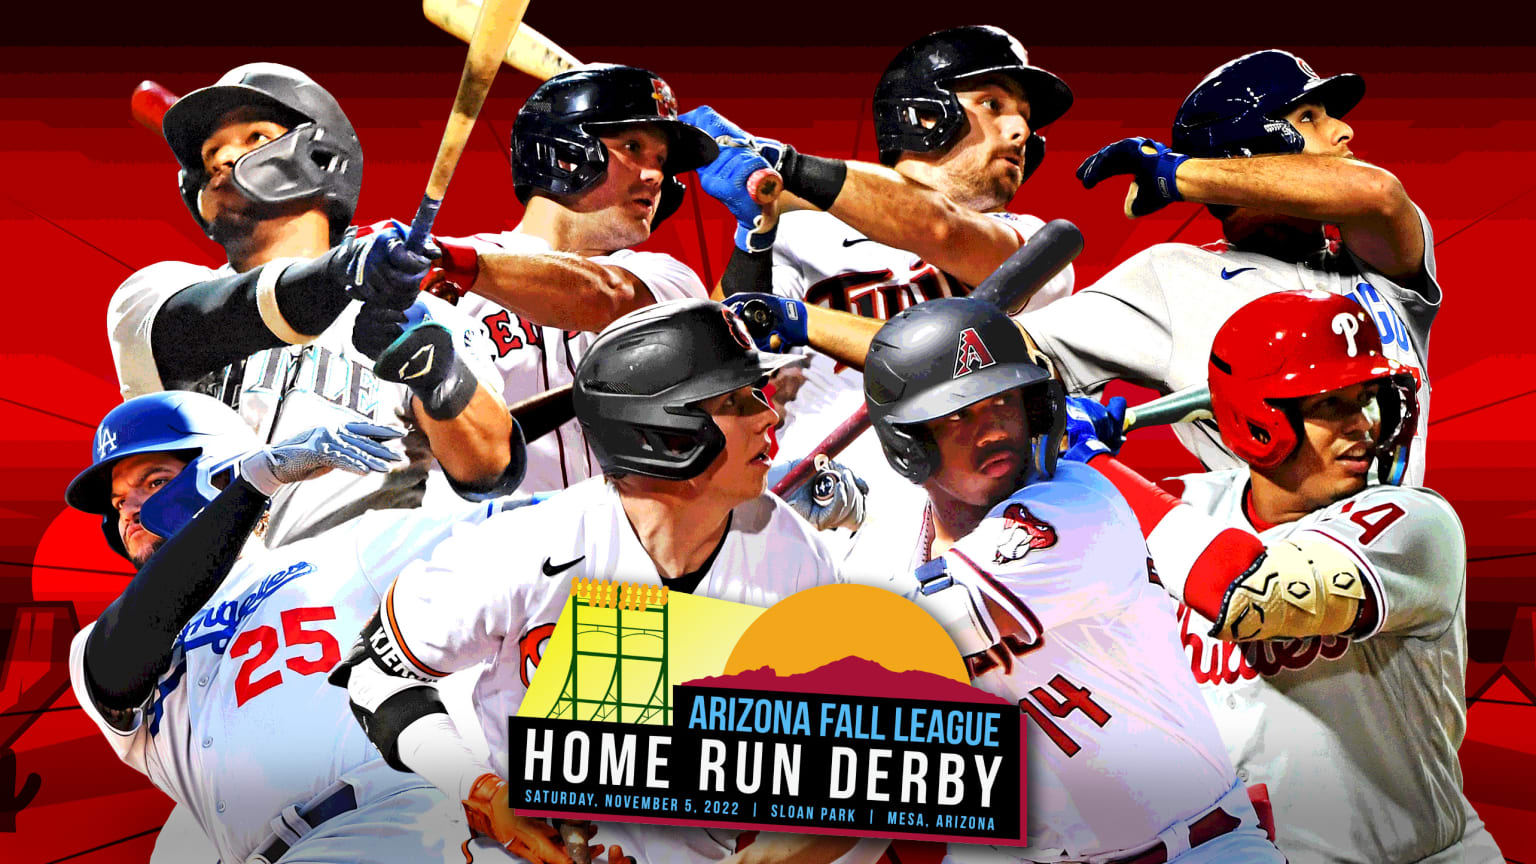 Eight players are pictured around a logo for the Arizona Fall League Home Run Derby